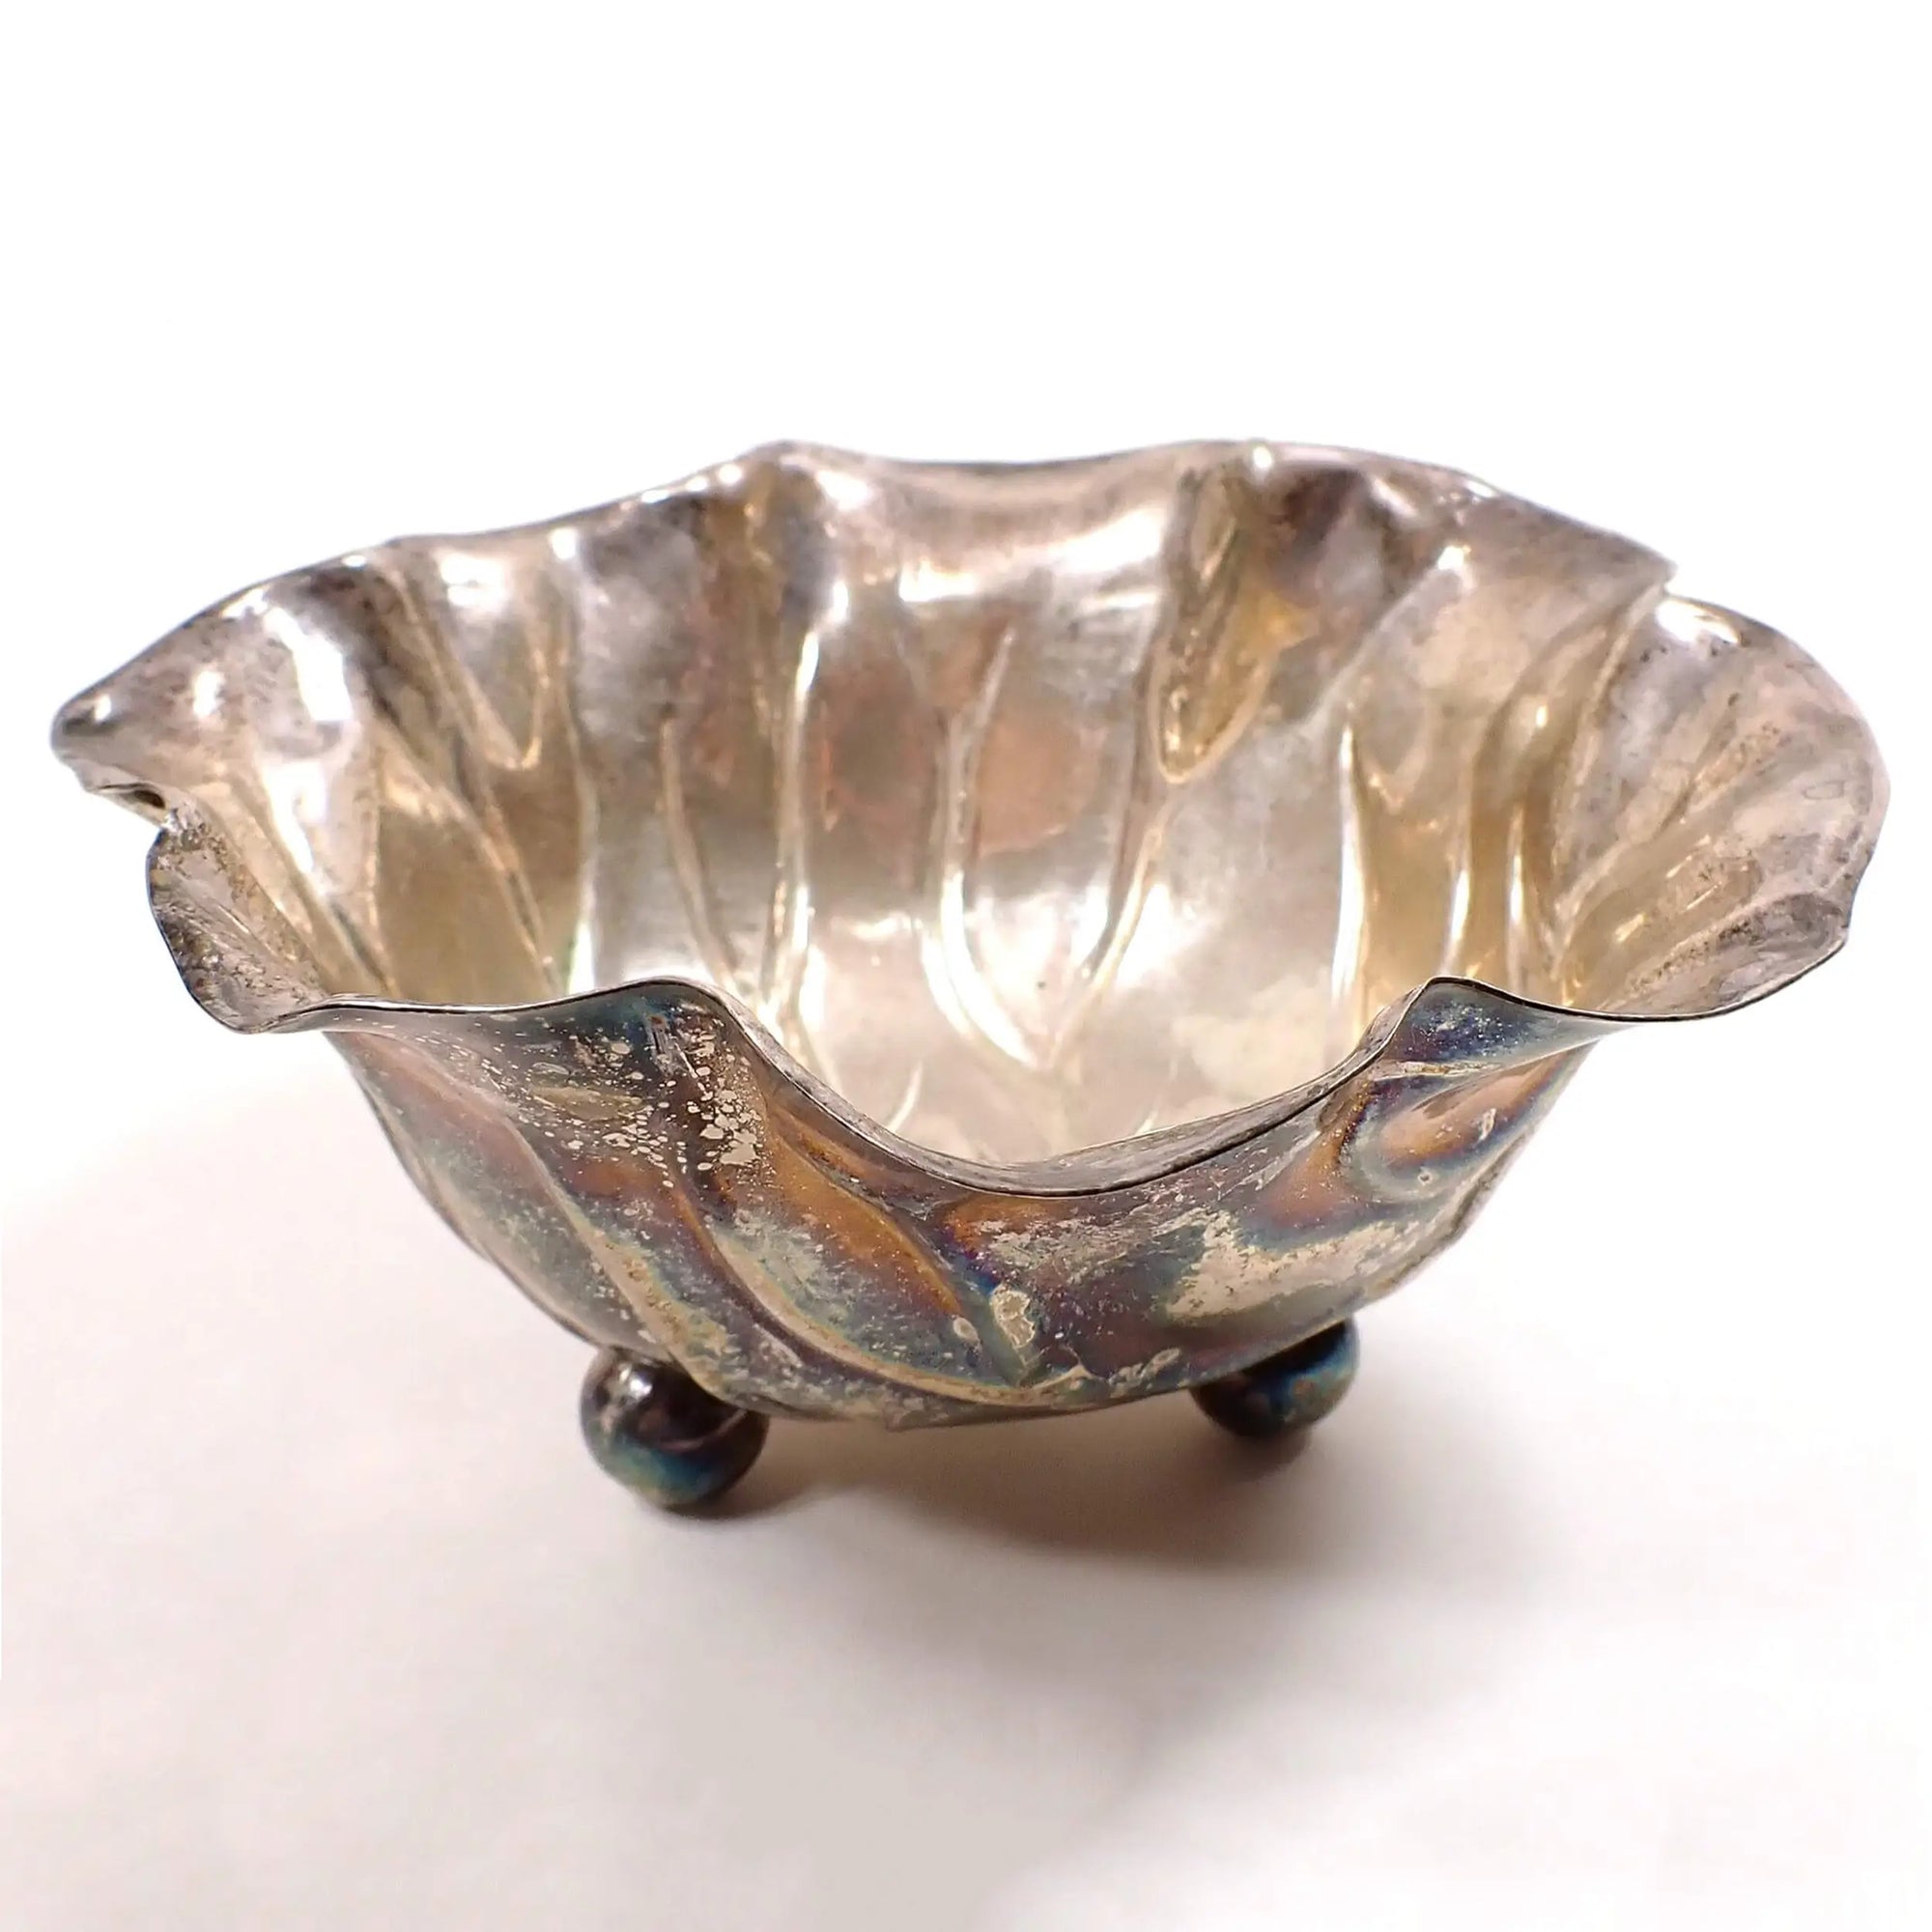 Angled view of the retro vintage Mexican Alpaca bowl. It is completely made out of metal and is a darkened antiqued silver tone in color. The bowl part is shaped like a cabbage leaf and there are three round ball "feet" at the bottom of the bowl.